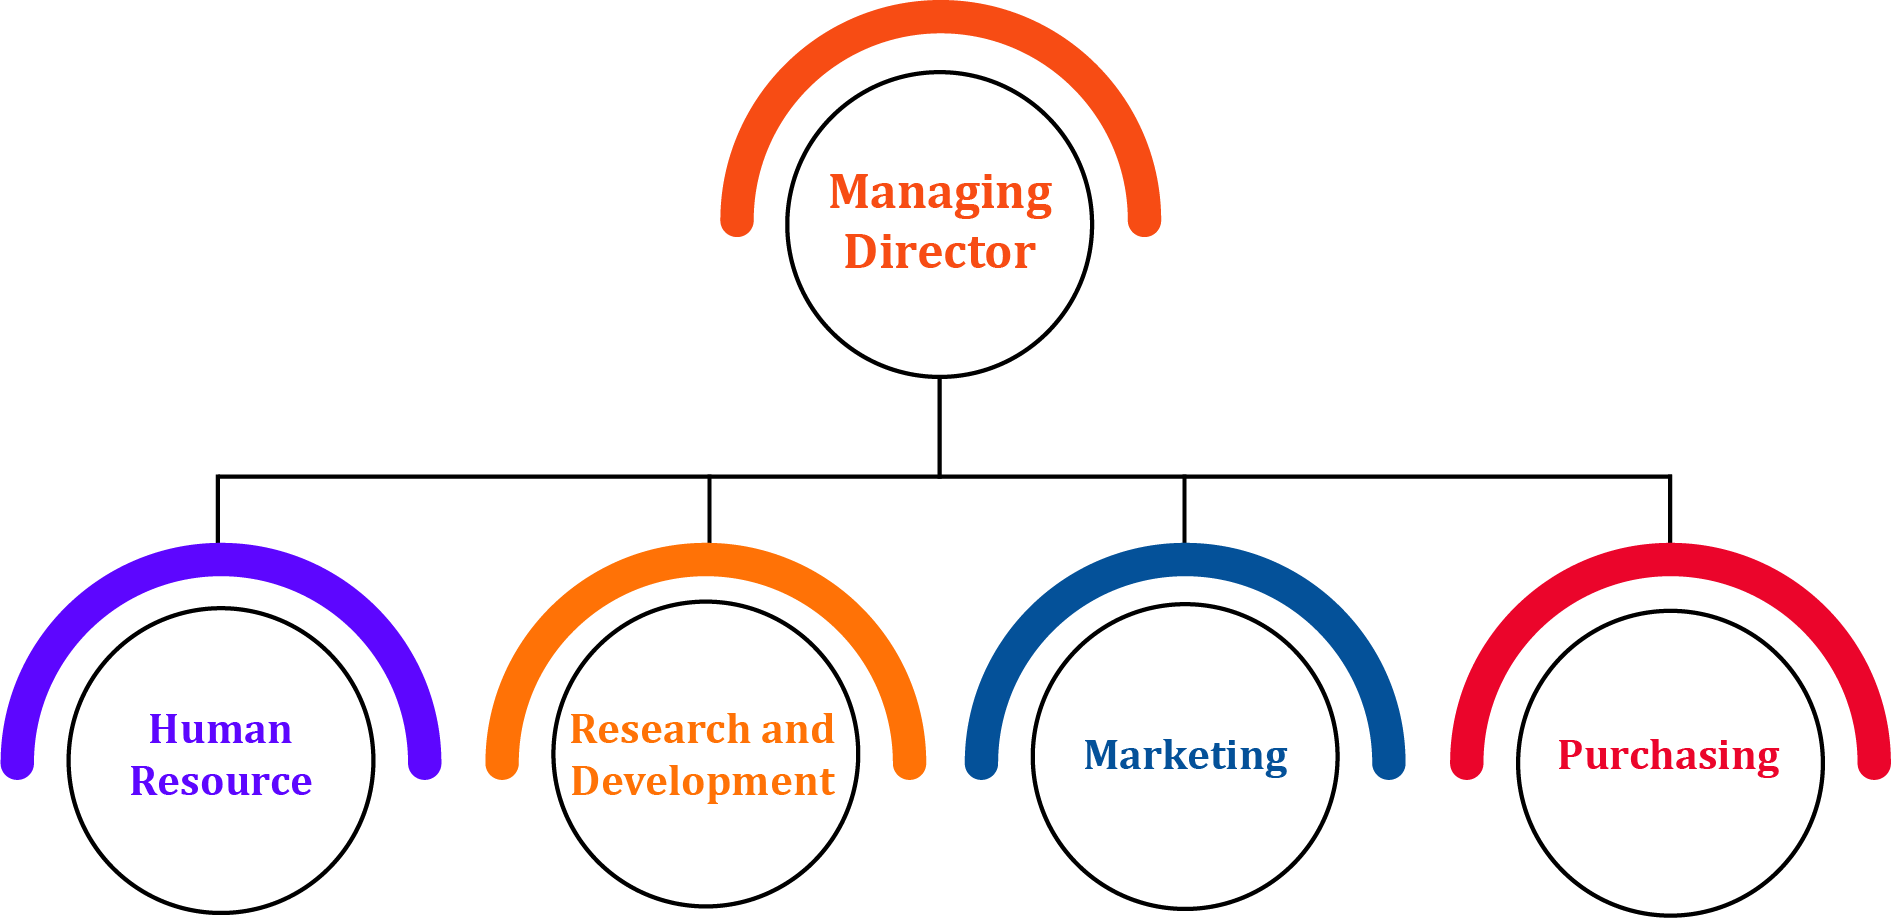 A functional structure of Management